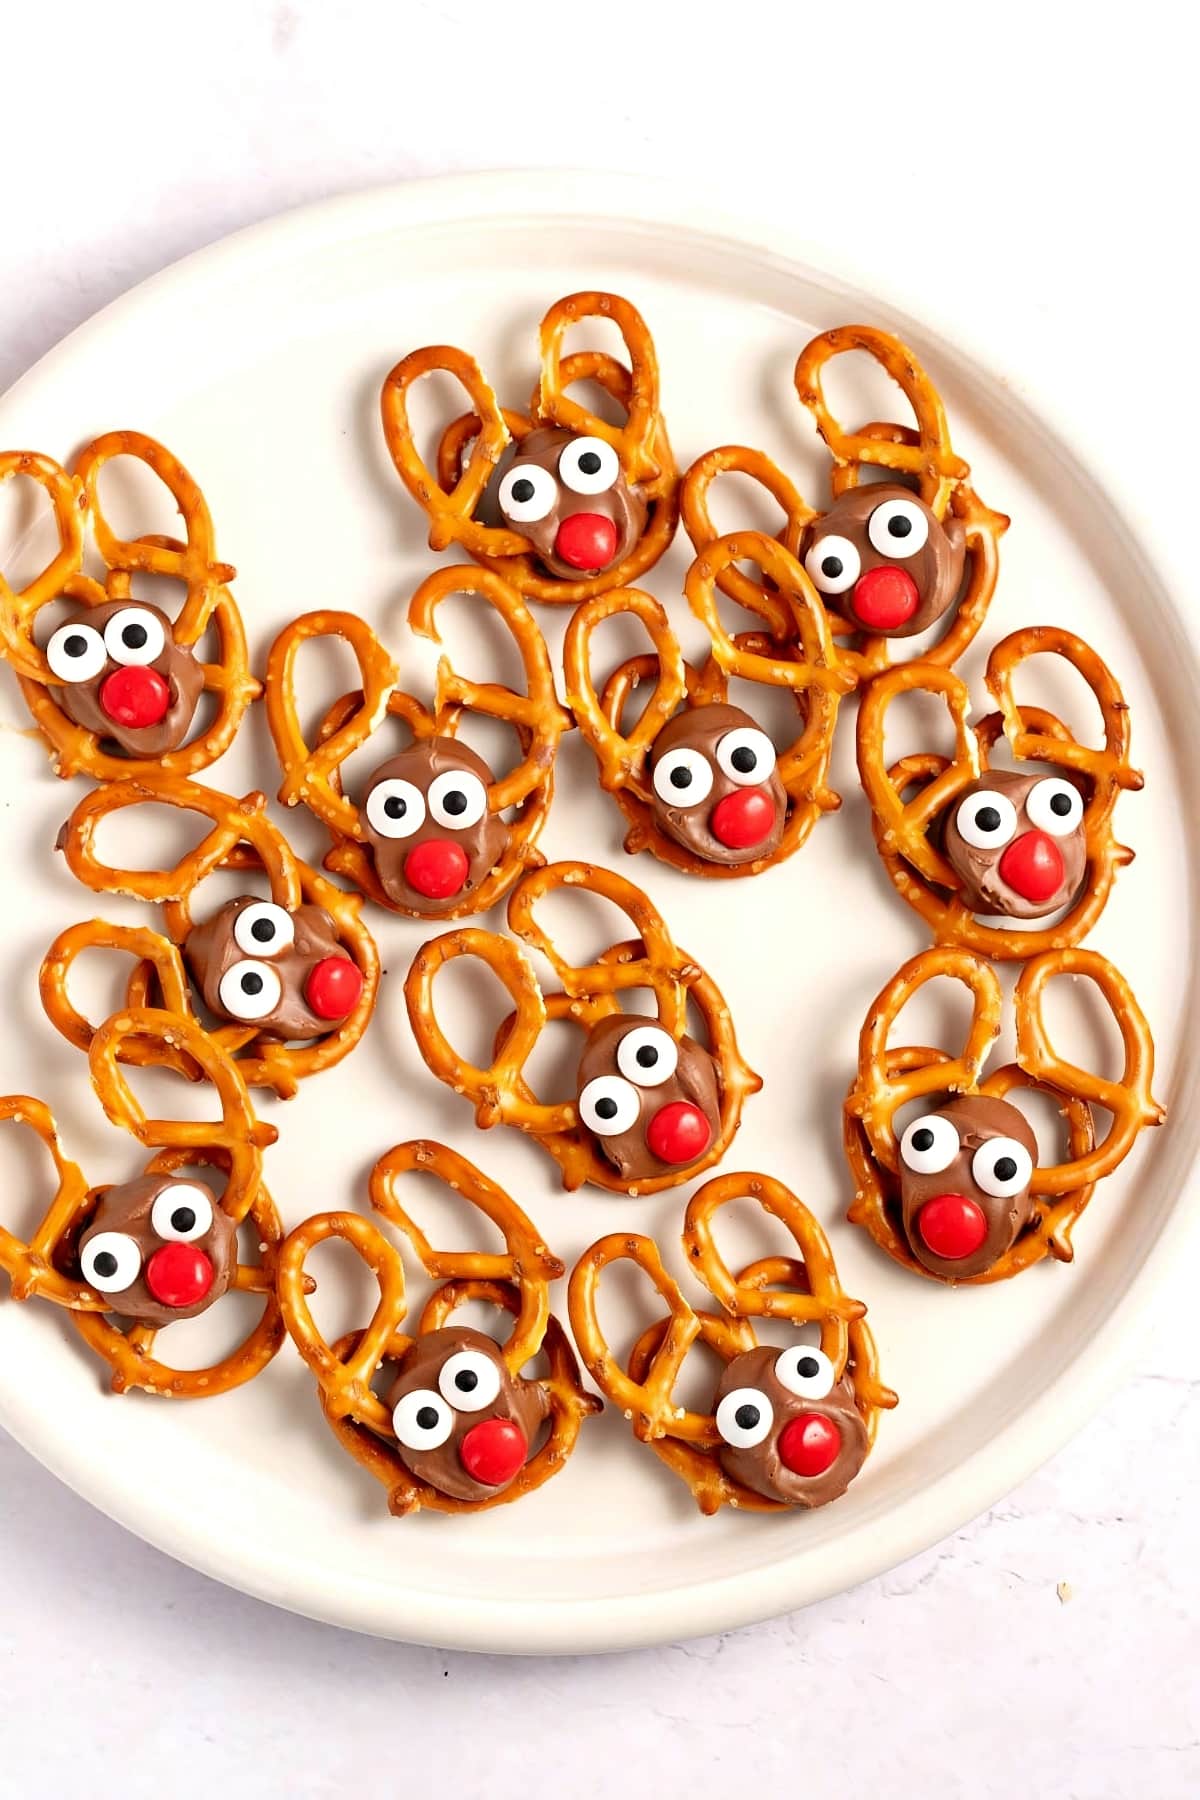 Homemade Reindeer Pretzels with Chocolates and Eye Candies